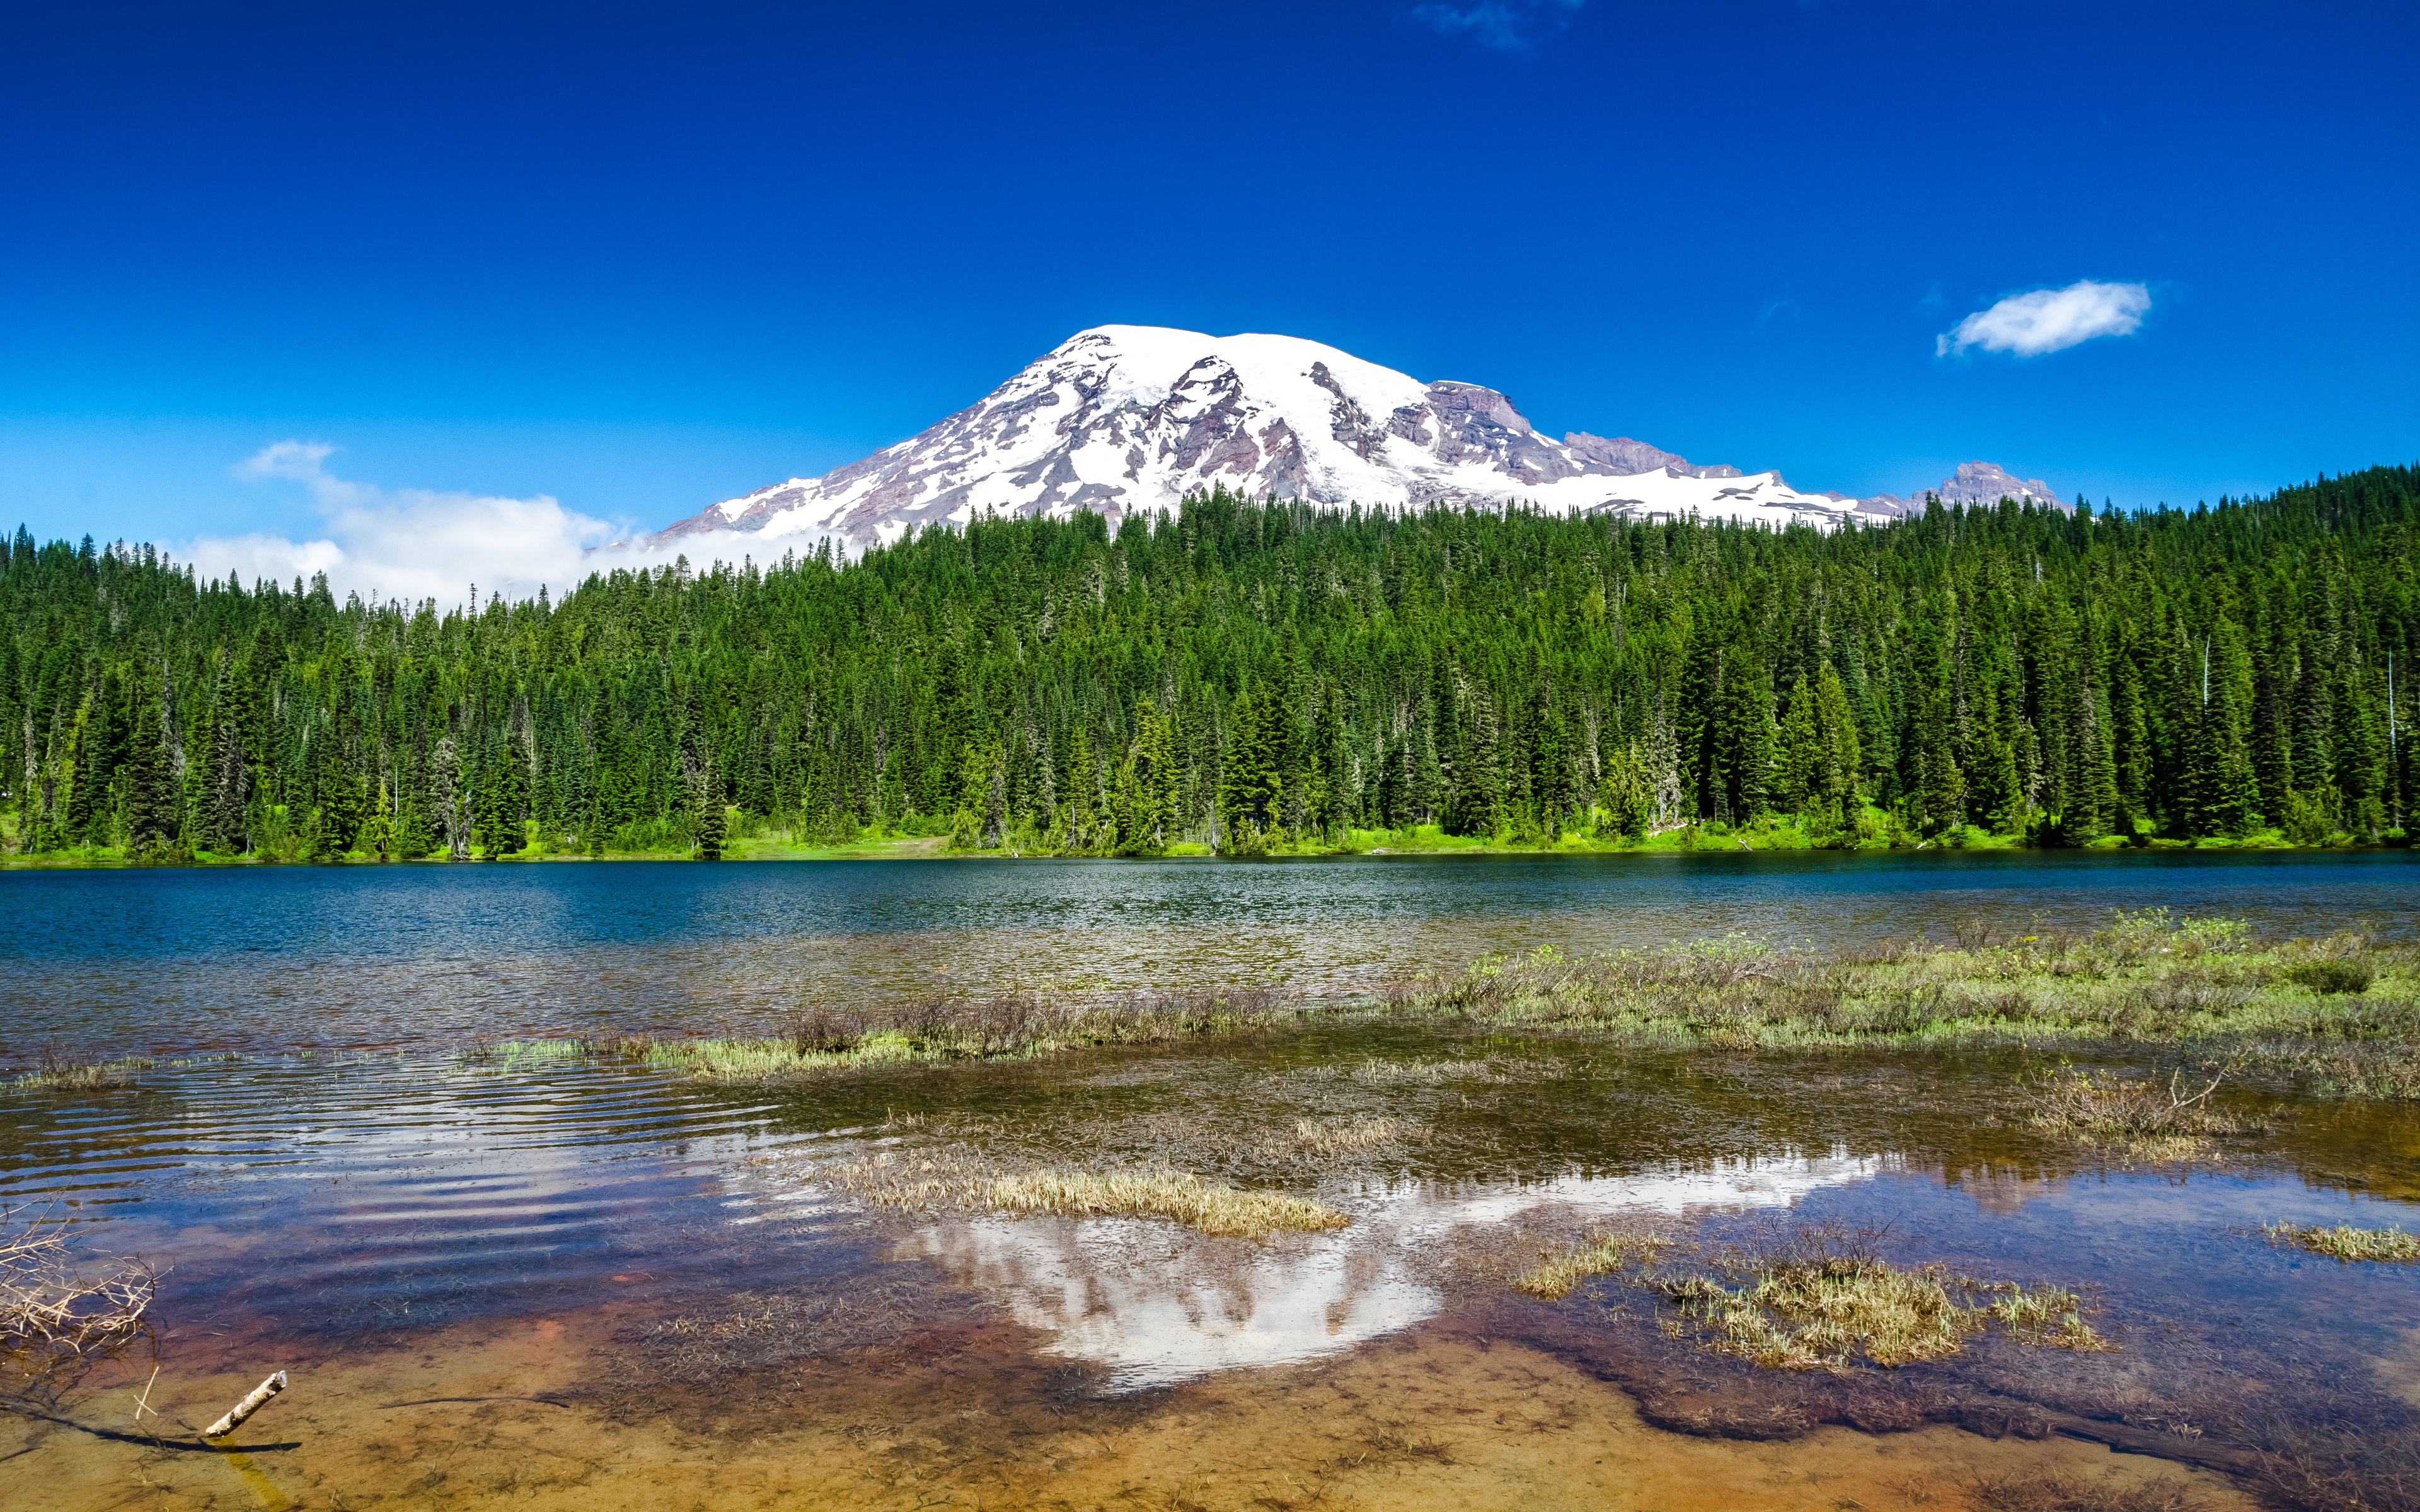 HD wallpaper, Lake, Scenery, Landscape, Glacier Mountains, Blue Sky, Snow Covered, Reflection, Clear Sky, Green Trees, Washington State, Mount Rainier National Park